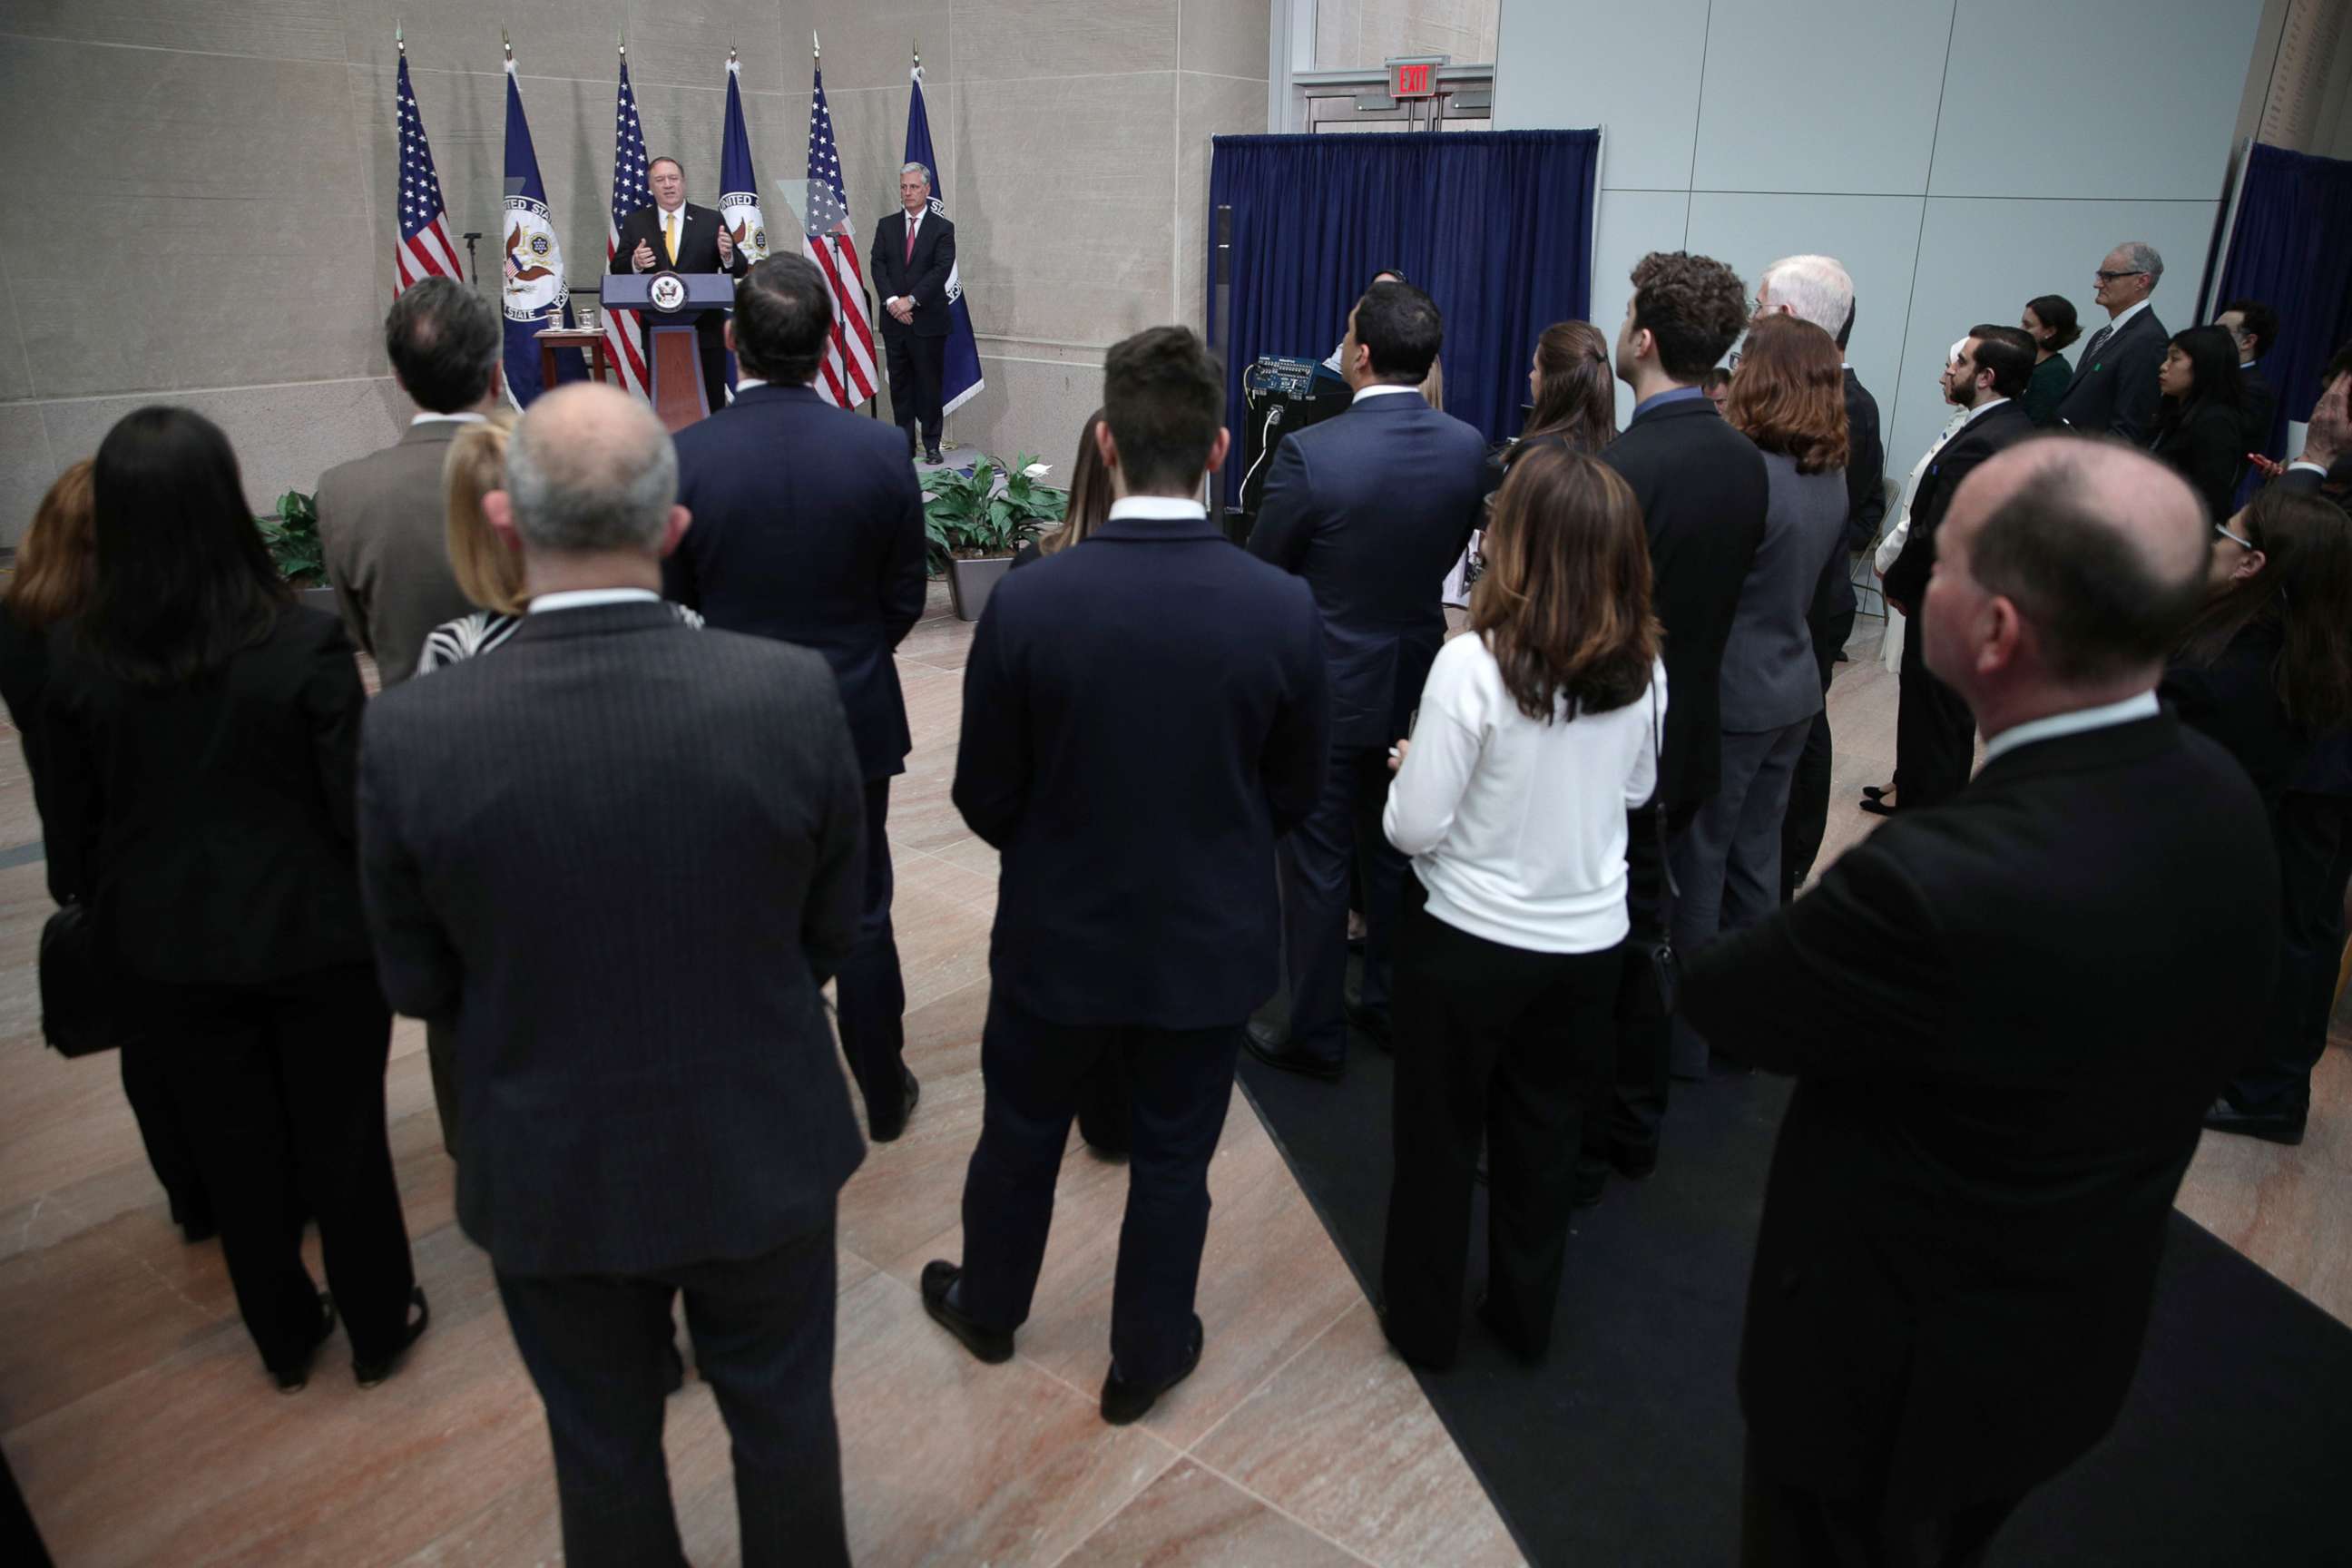 PHOTO: Secretary of State Mike Pompeo delivers remarks during a reception at the State Department April 2, 2019 in Washington, D.C. Secretary Pompeo spoke to families of American citizens held captive abroad at the event.